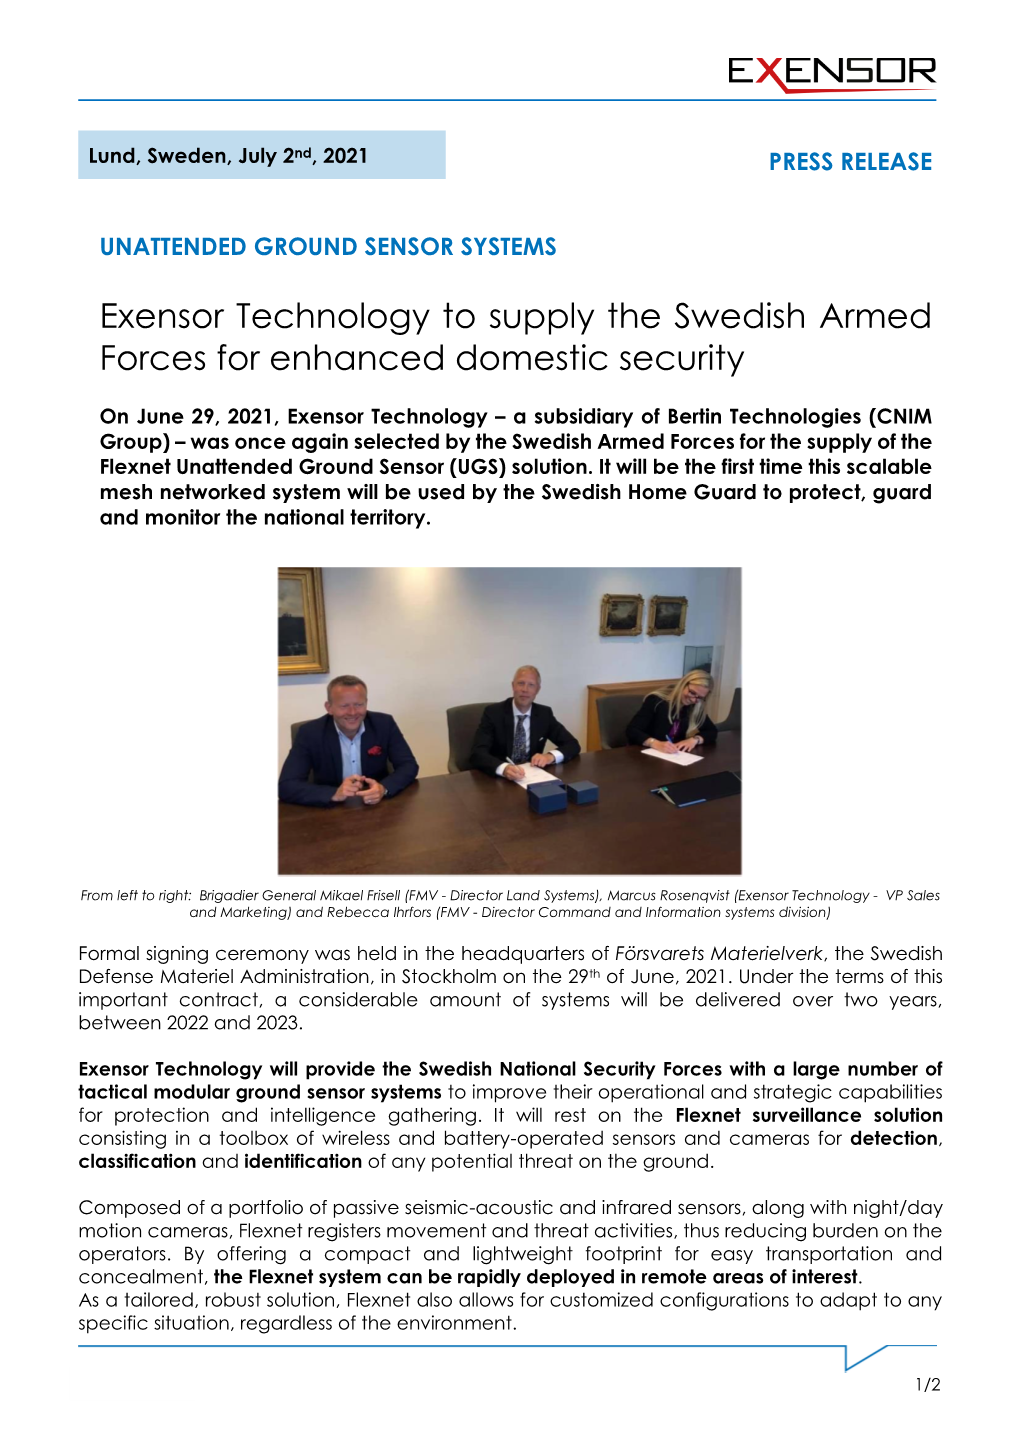 Exensor Technology to Supply the Swedish Armed Forces for Enhanced Domestic Security